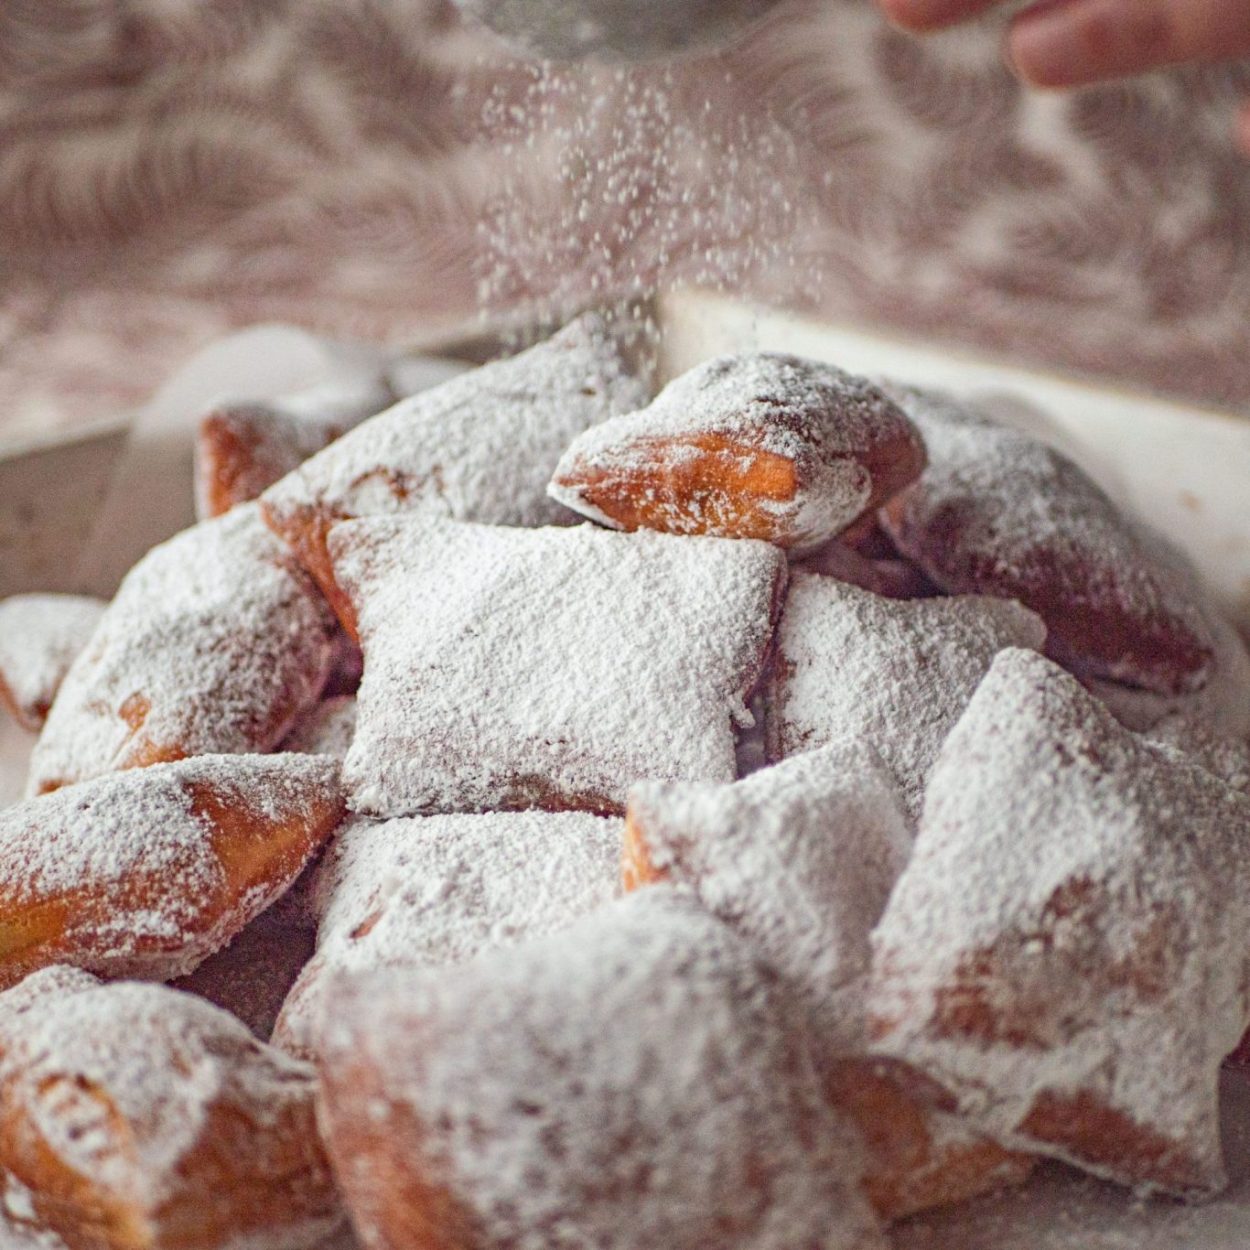 New Orleans beignets – Princess and the frog